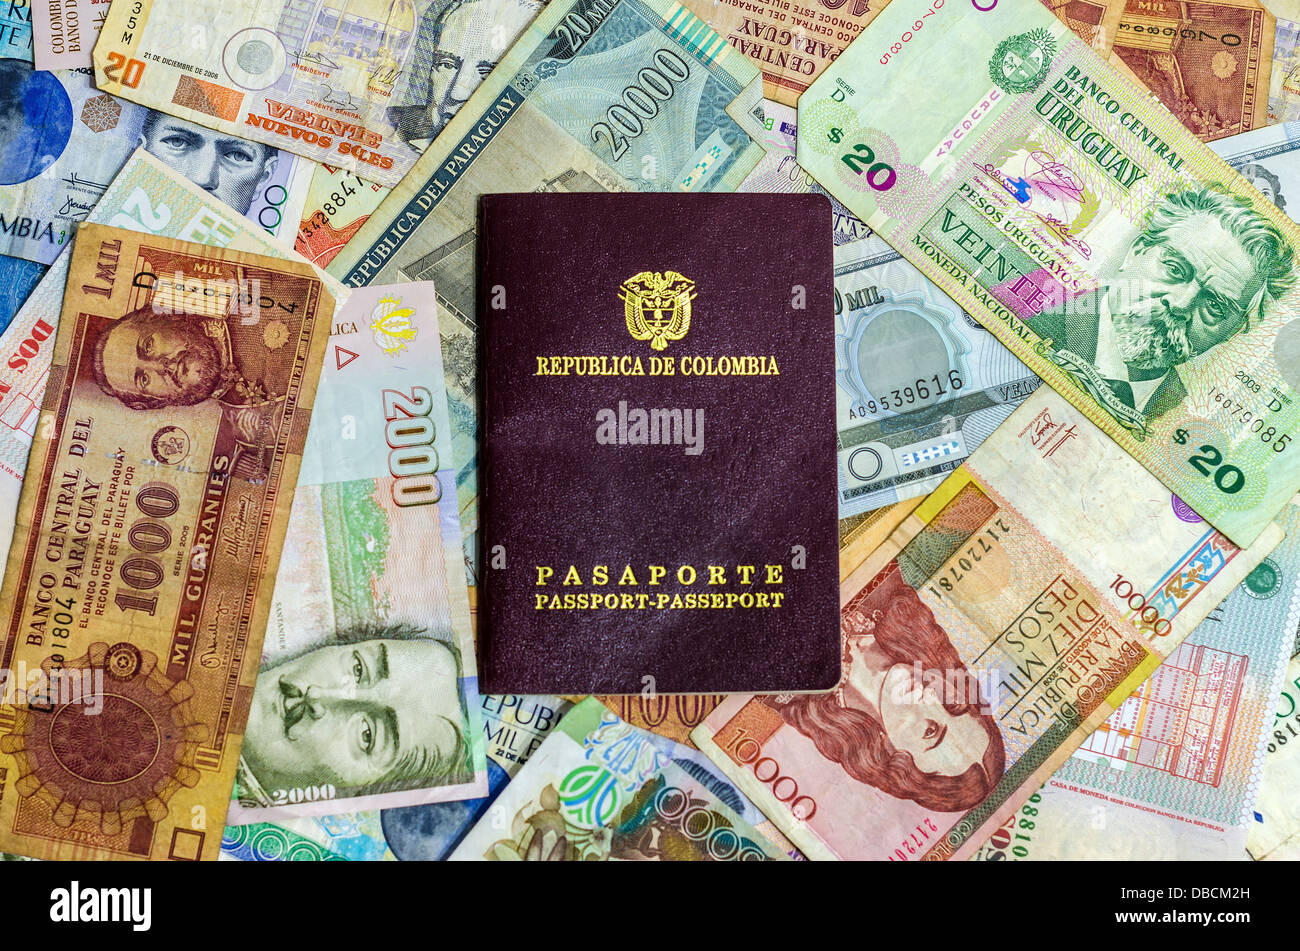 Colombian passport with various Latin American currencies Stock Photo